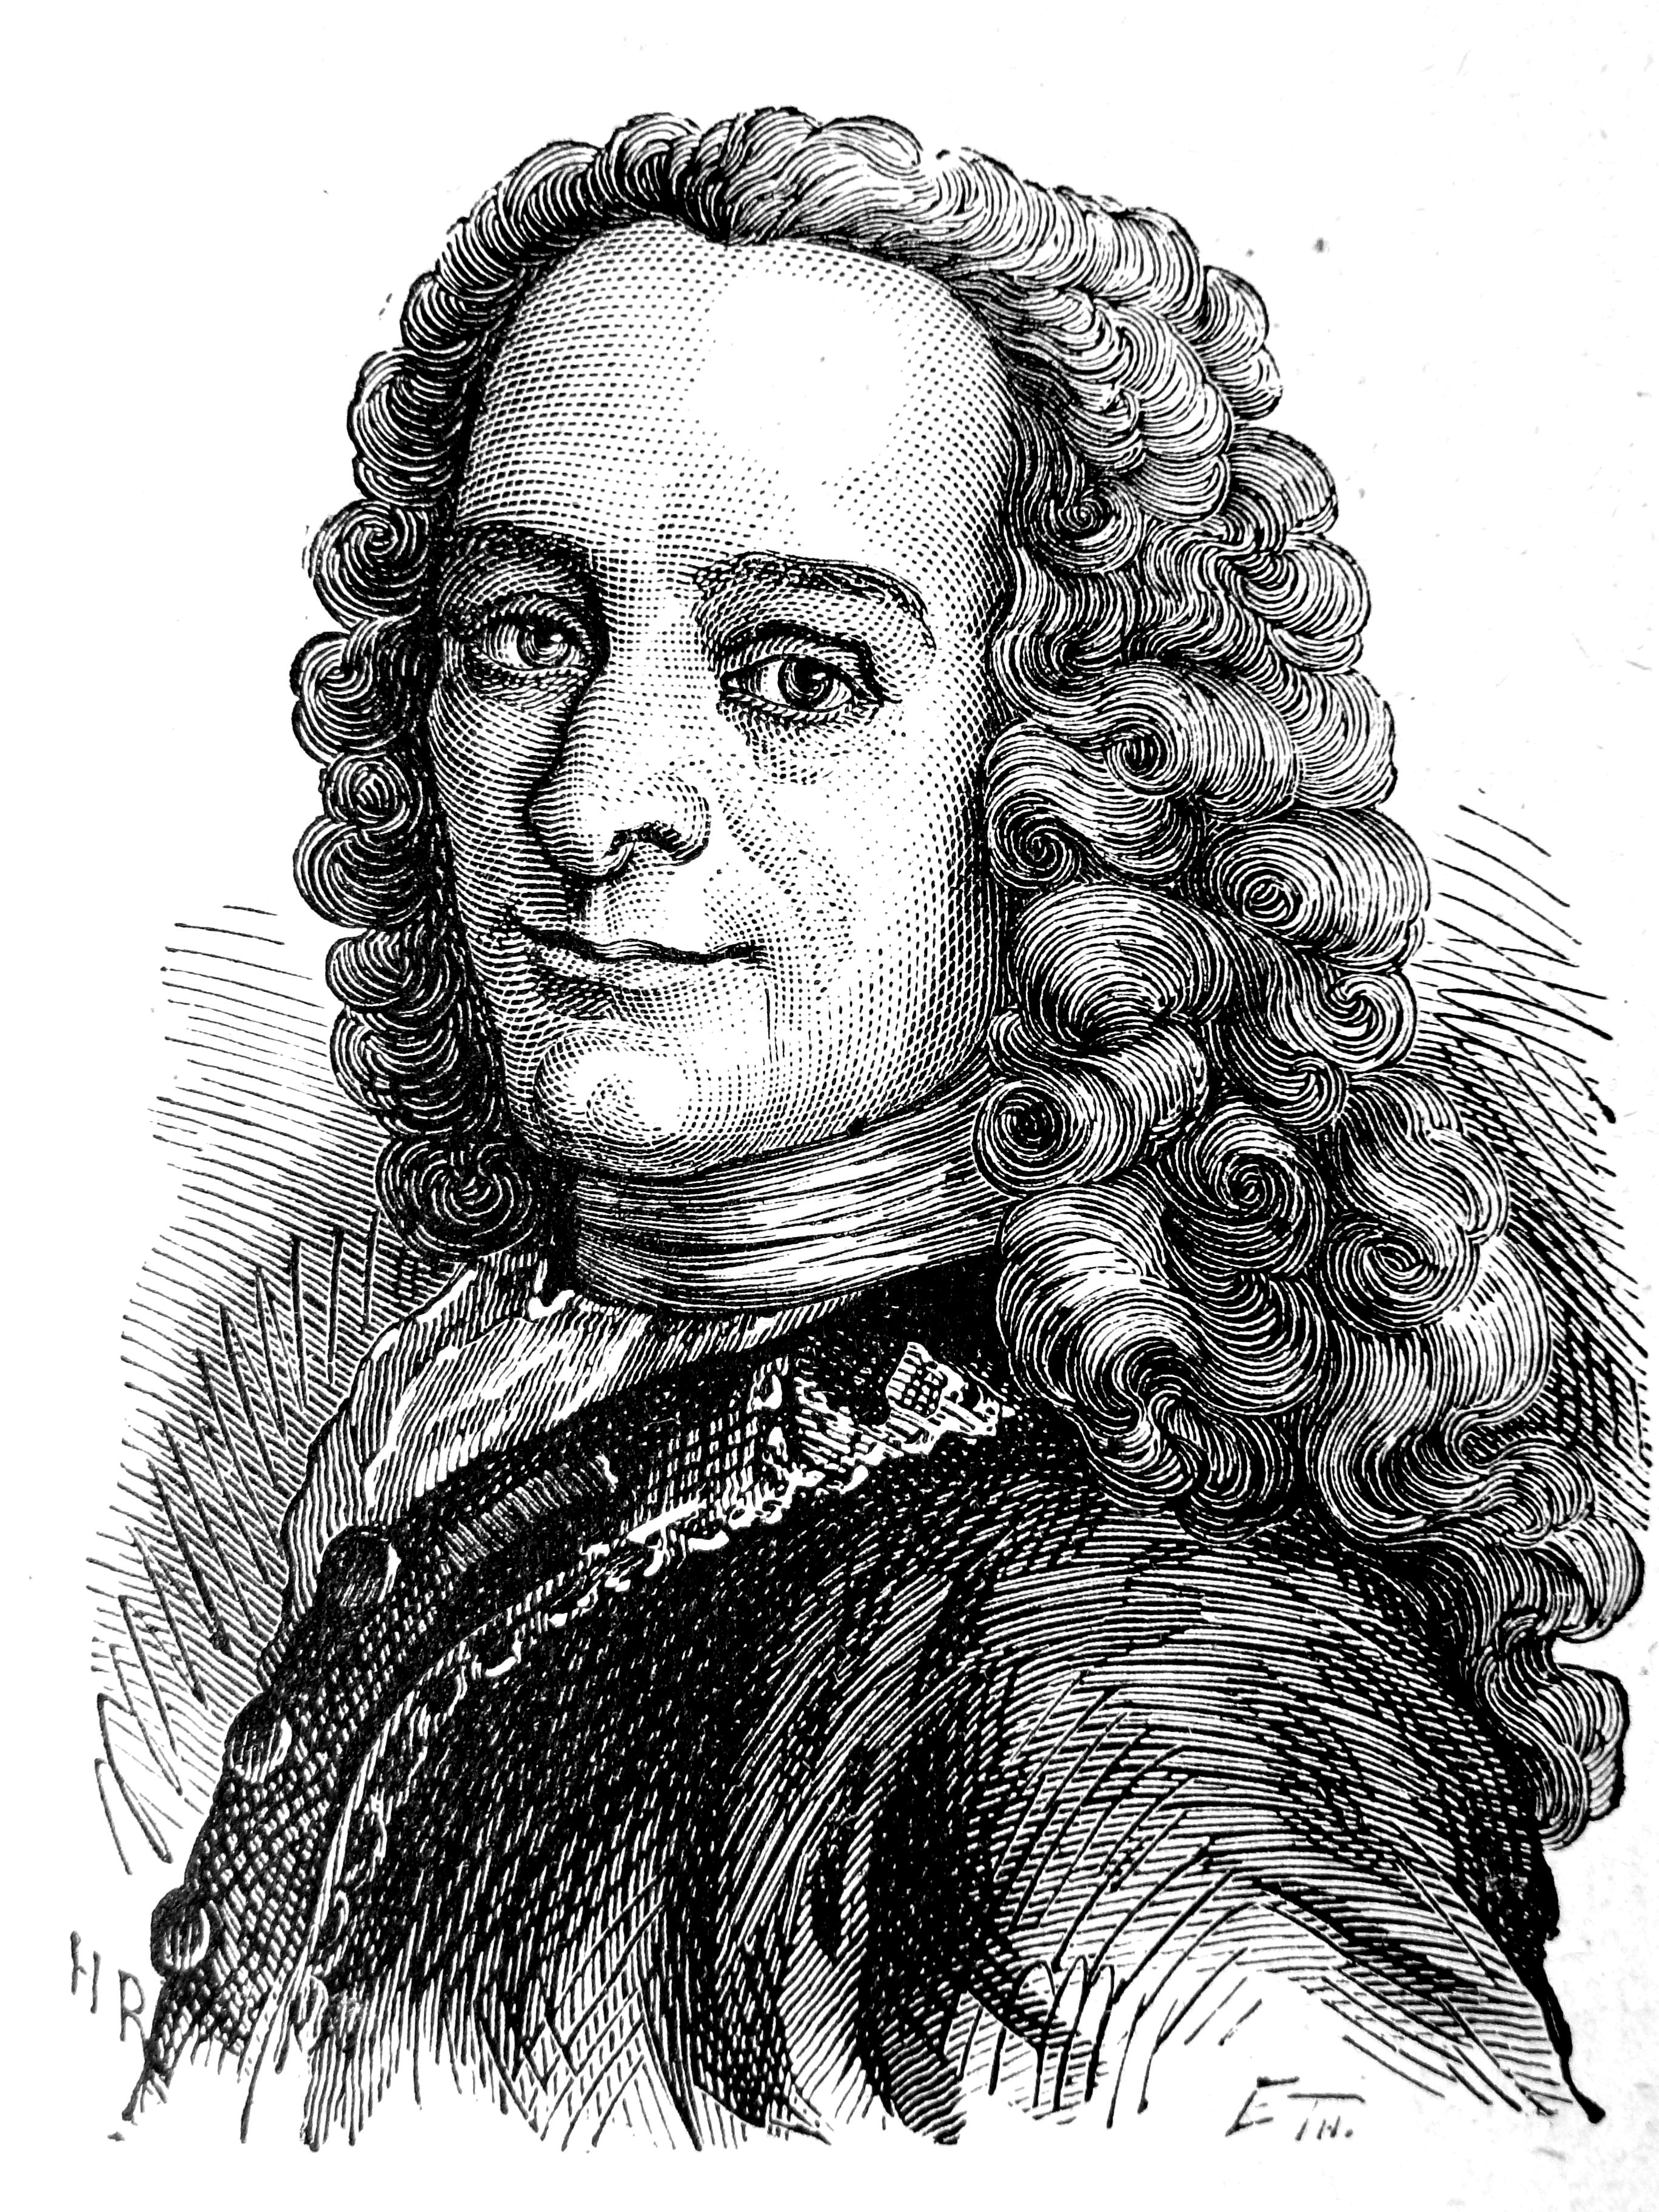 File:AduC 002 Voltaire (1694-1778).JPG - Wikimedia Commons